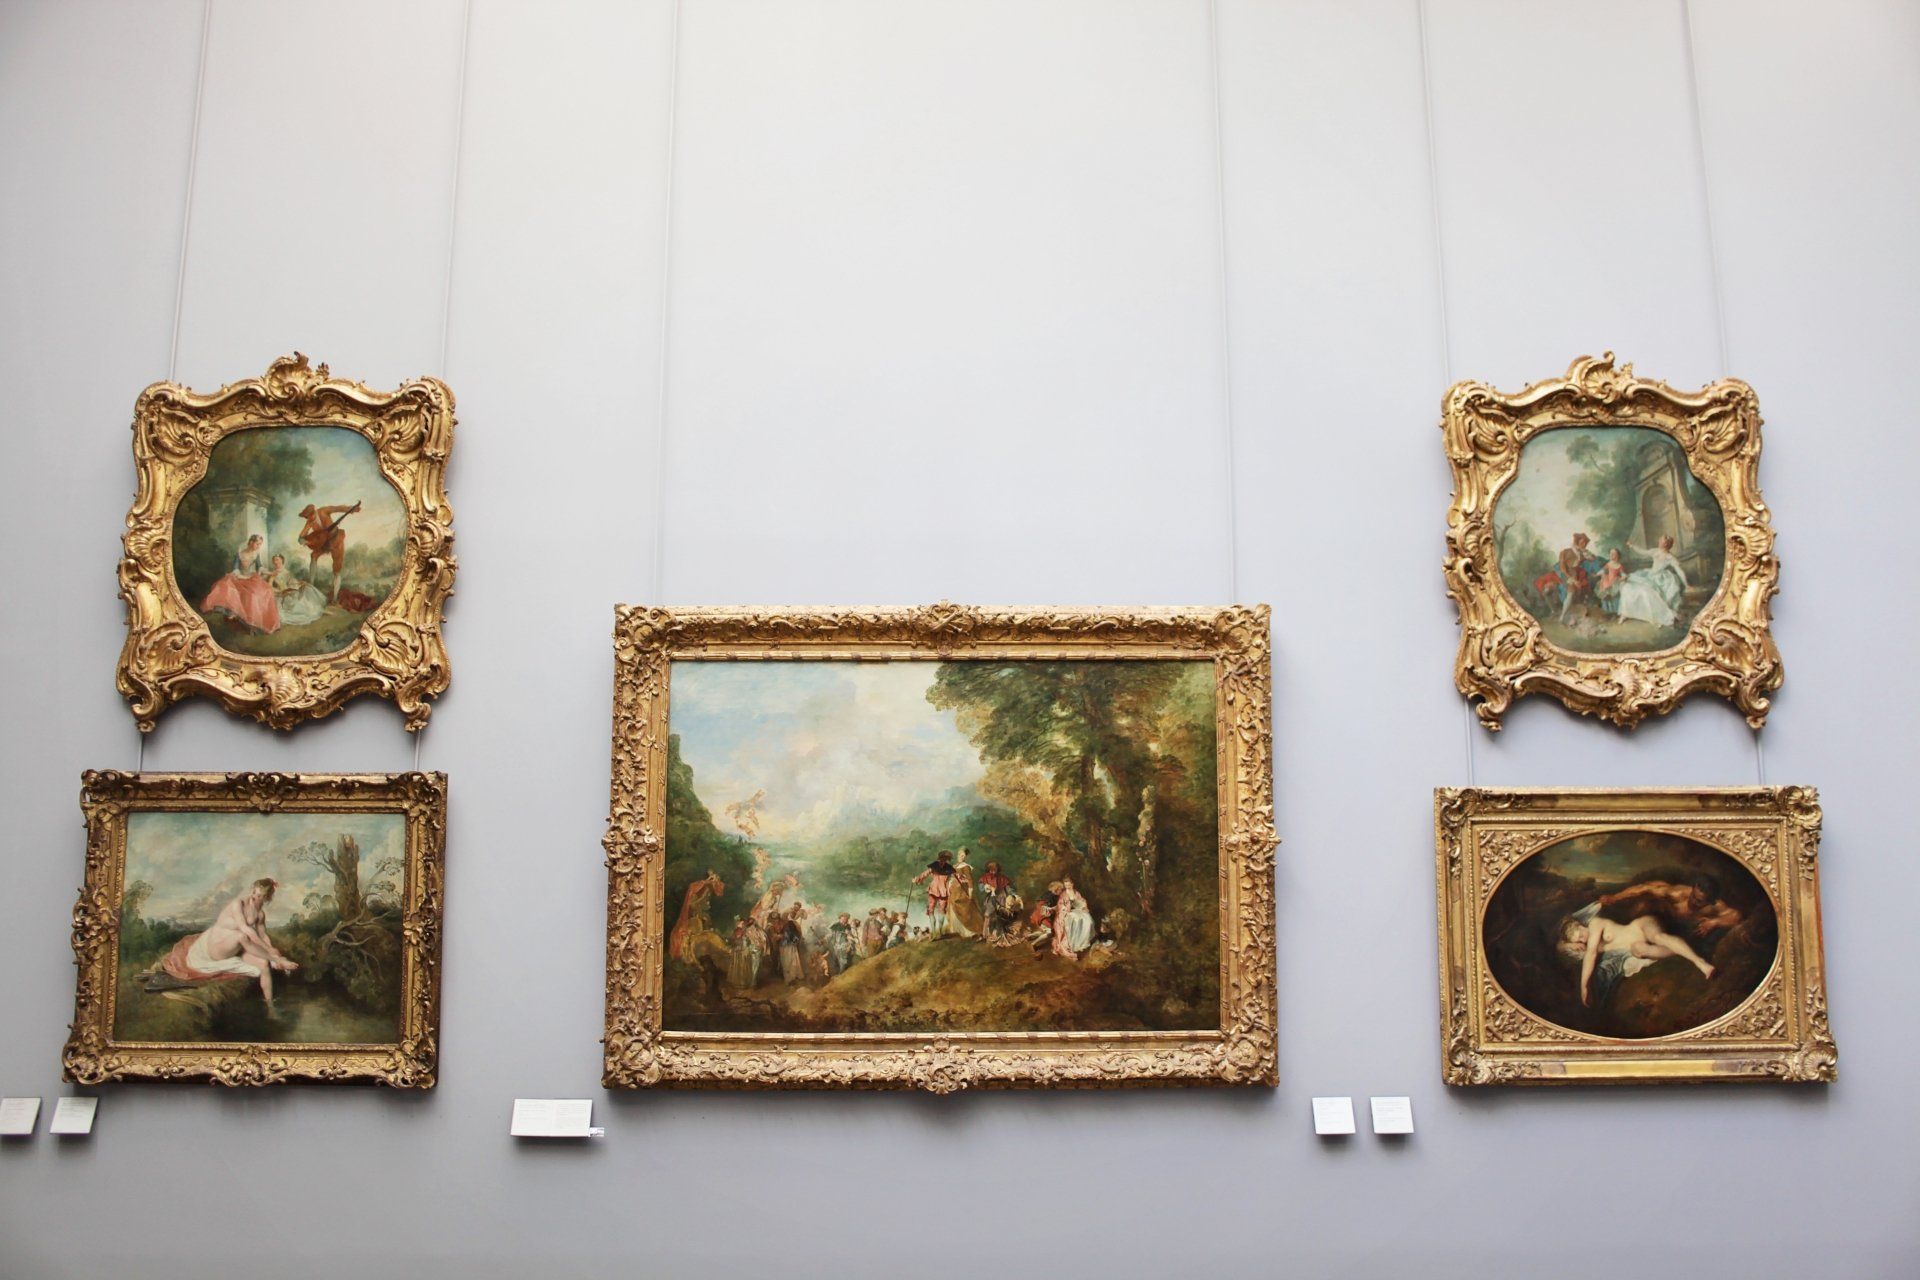 Several paintings are hanging on a wall in a museum